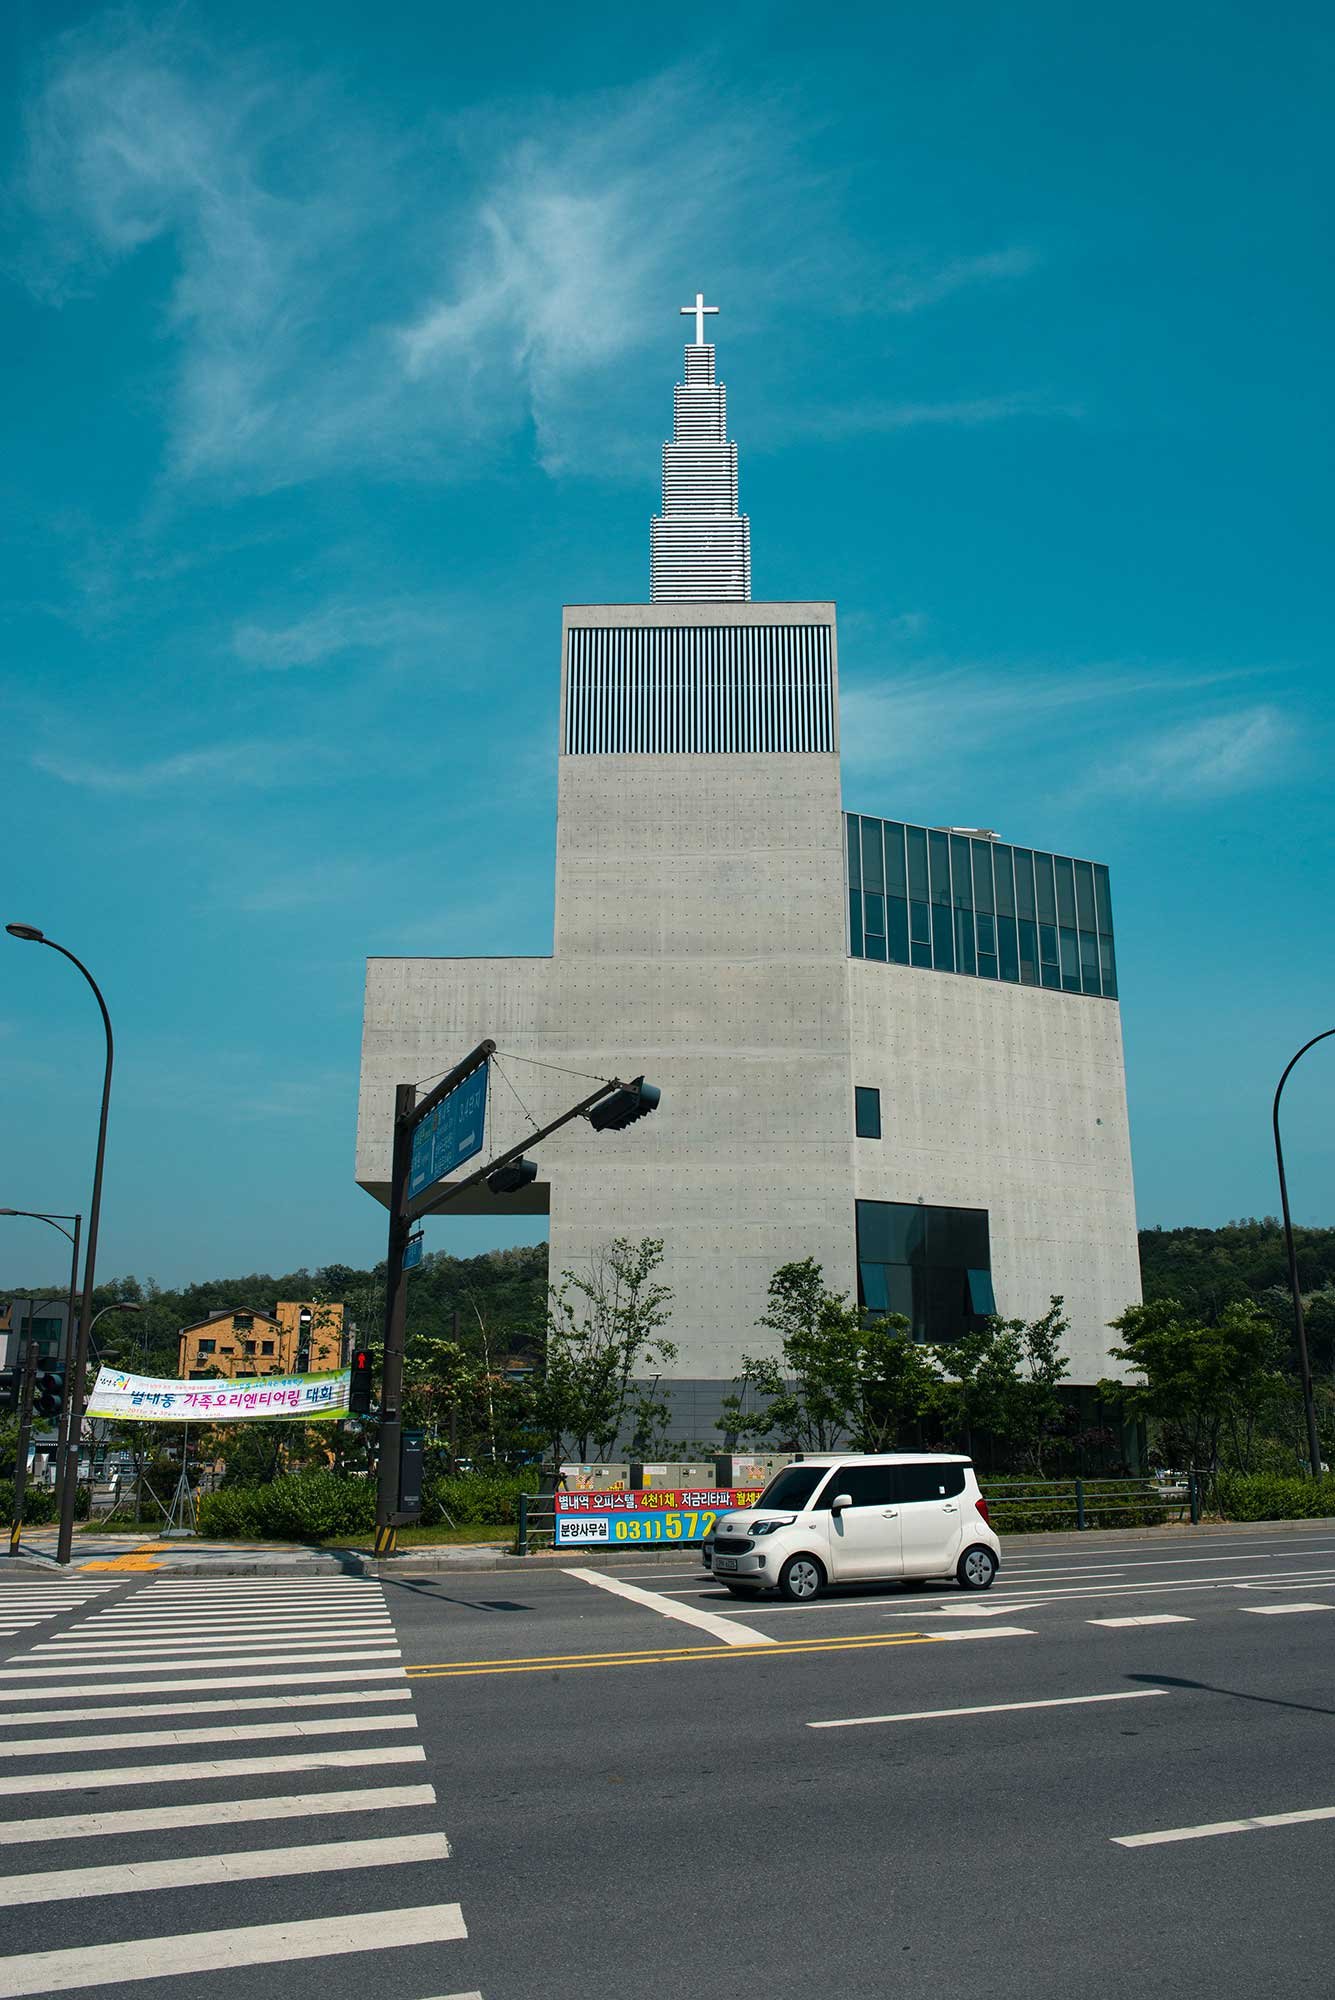 The Nameless Architecture RW Church in Seoul